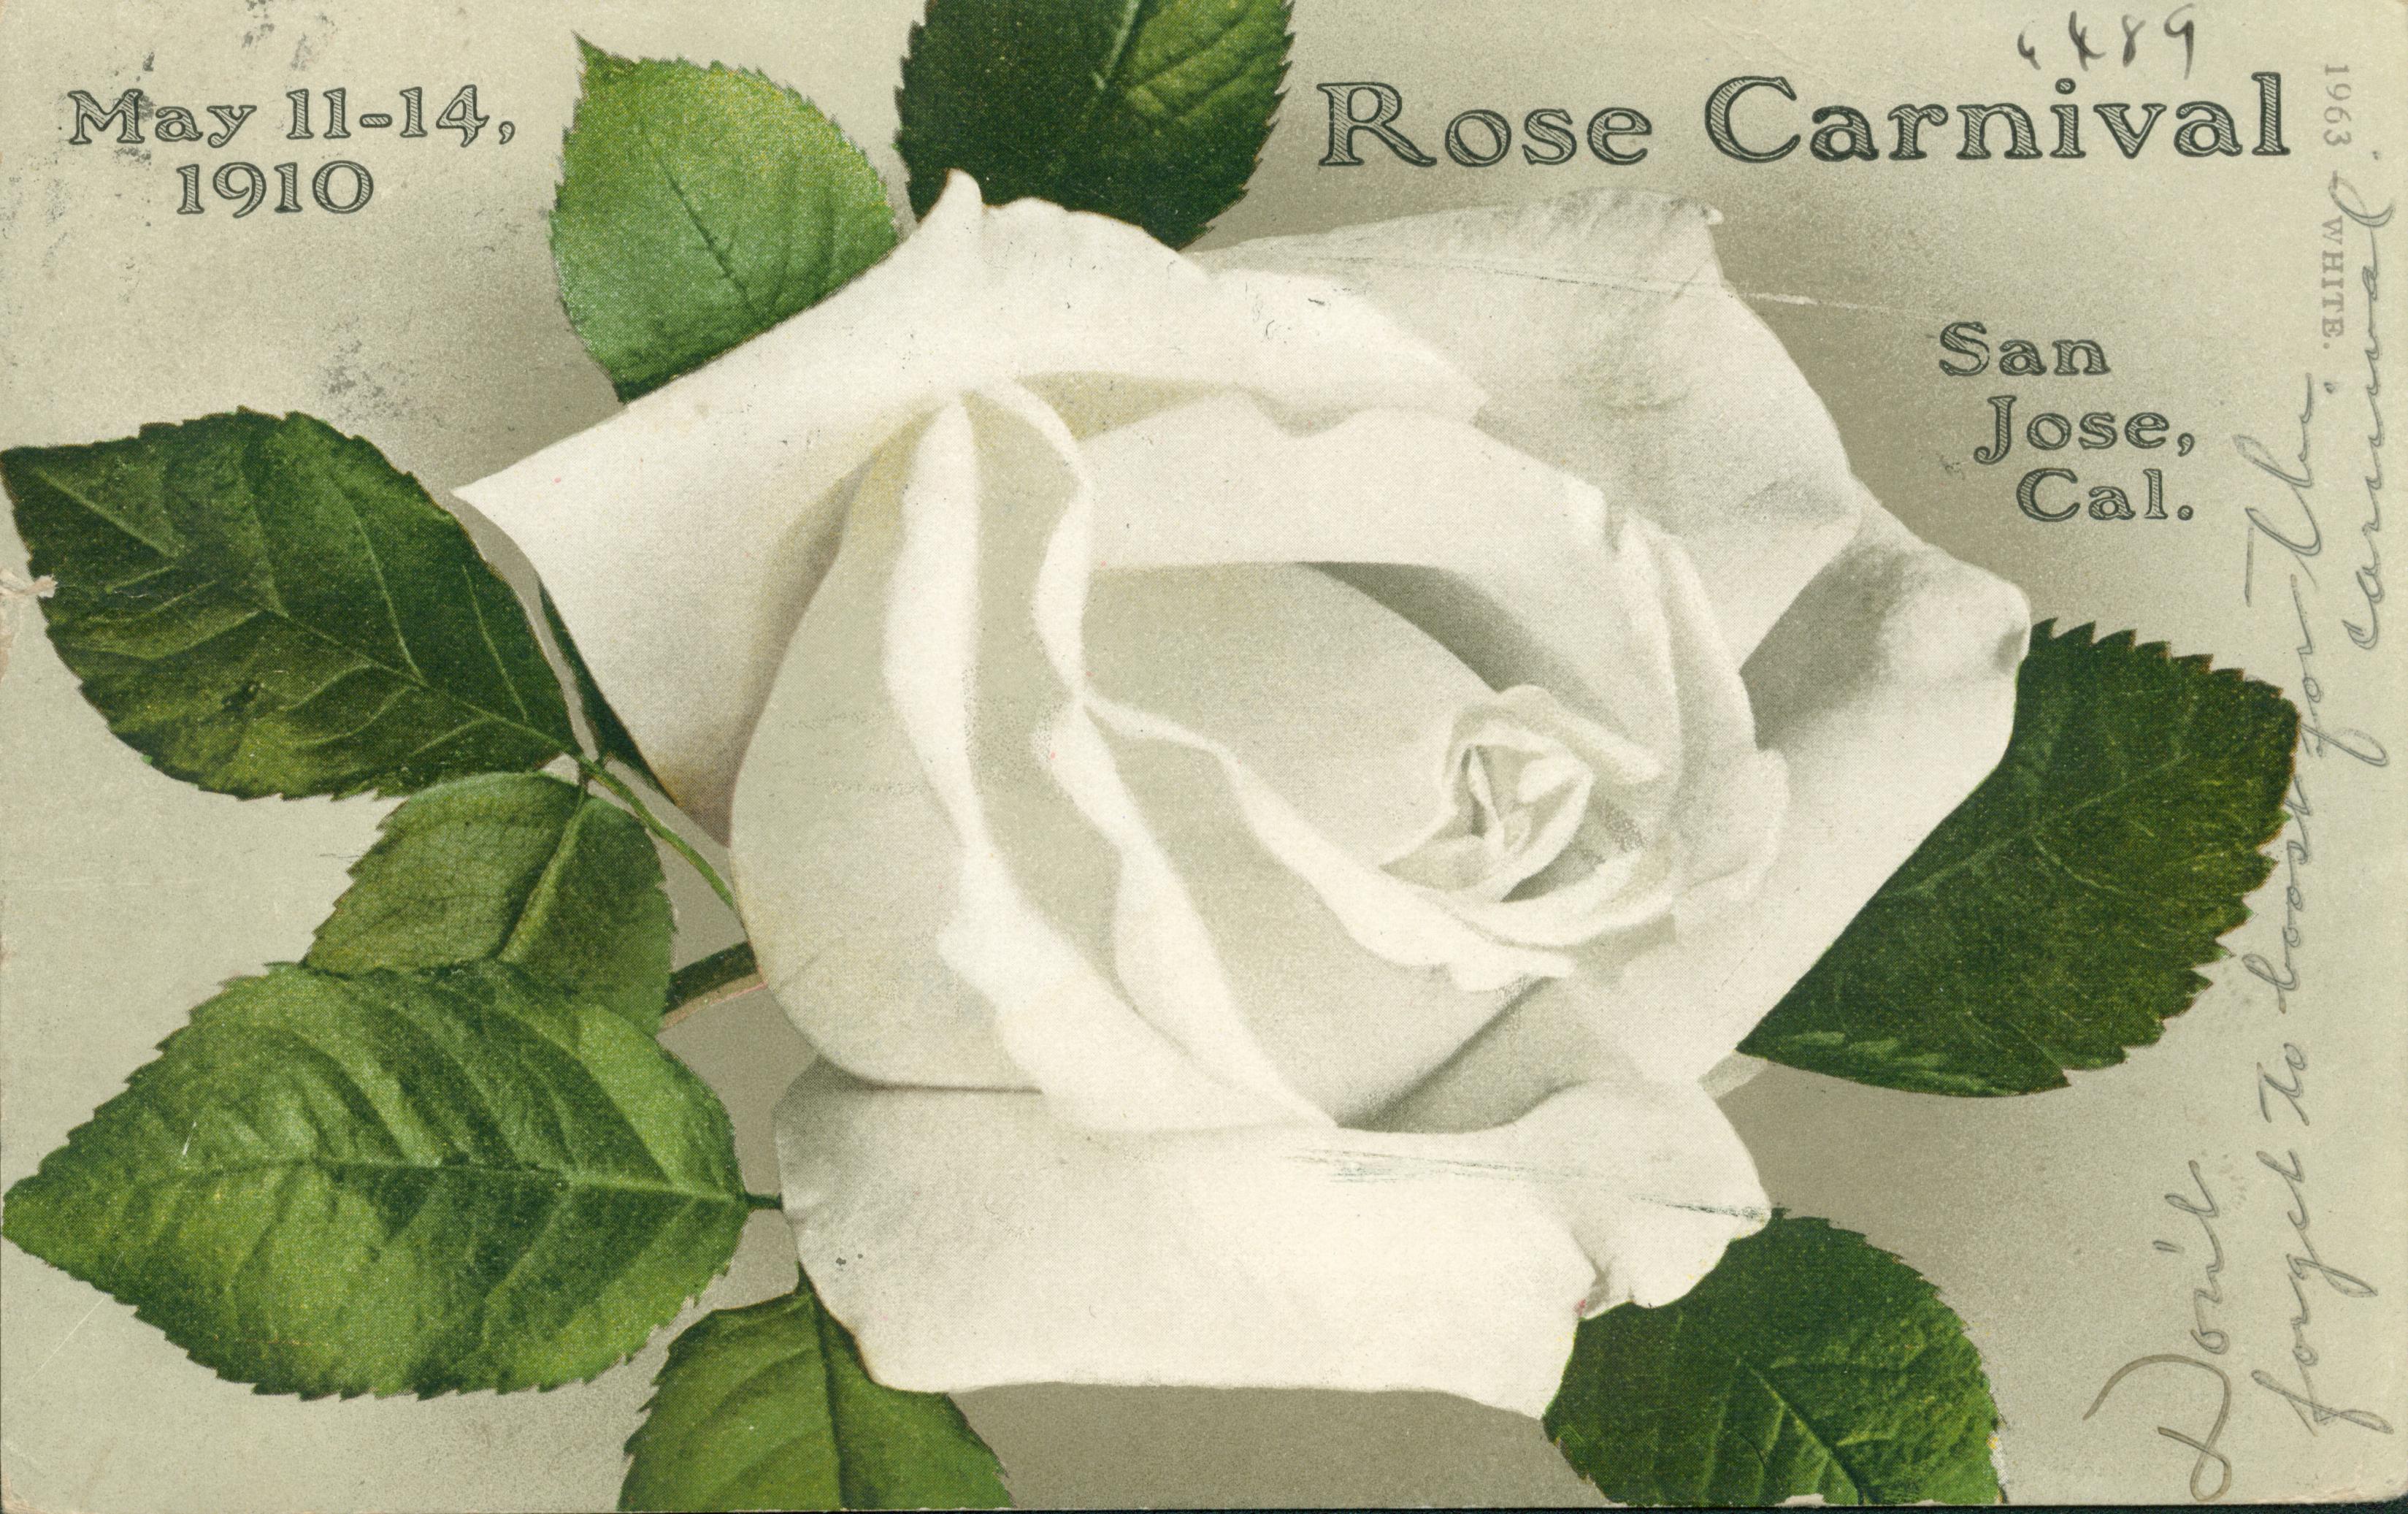 White rose with green leaves and text with carnival details